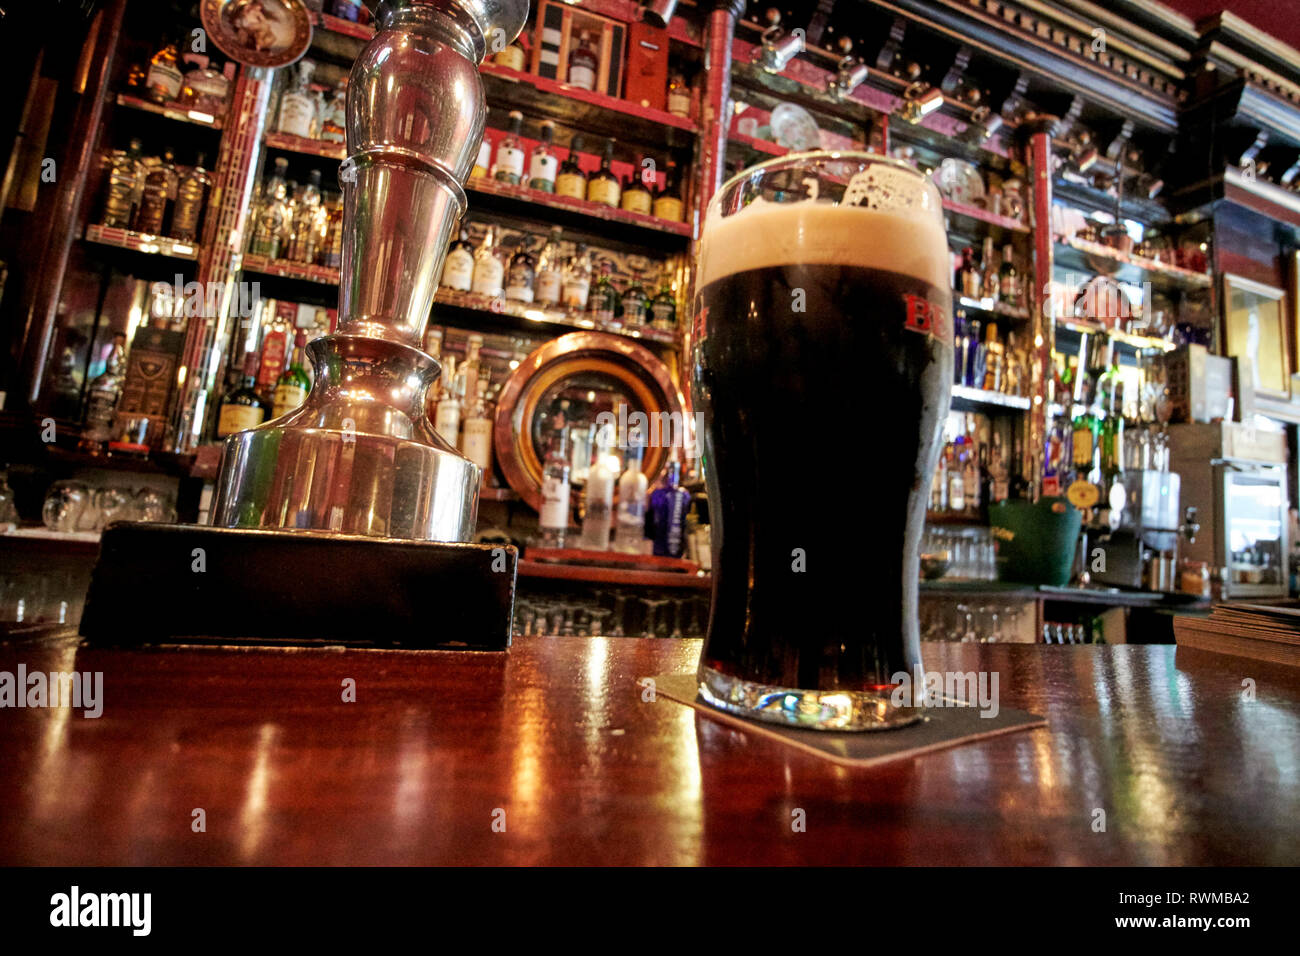 Oldest Pub Ireland High Resolution Stock Photography and Images - Alamy